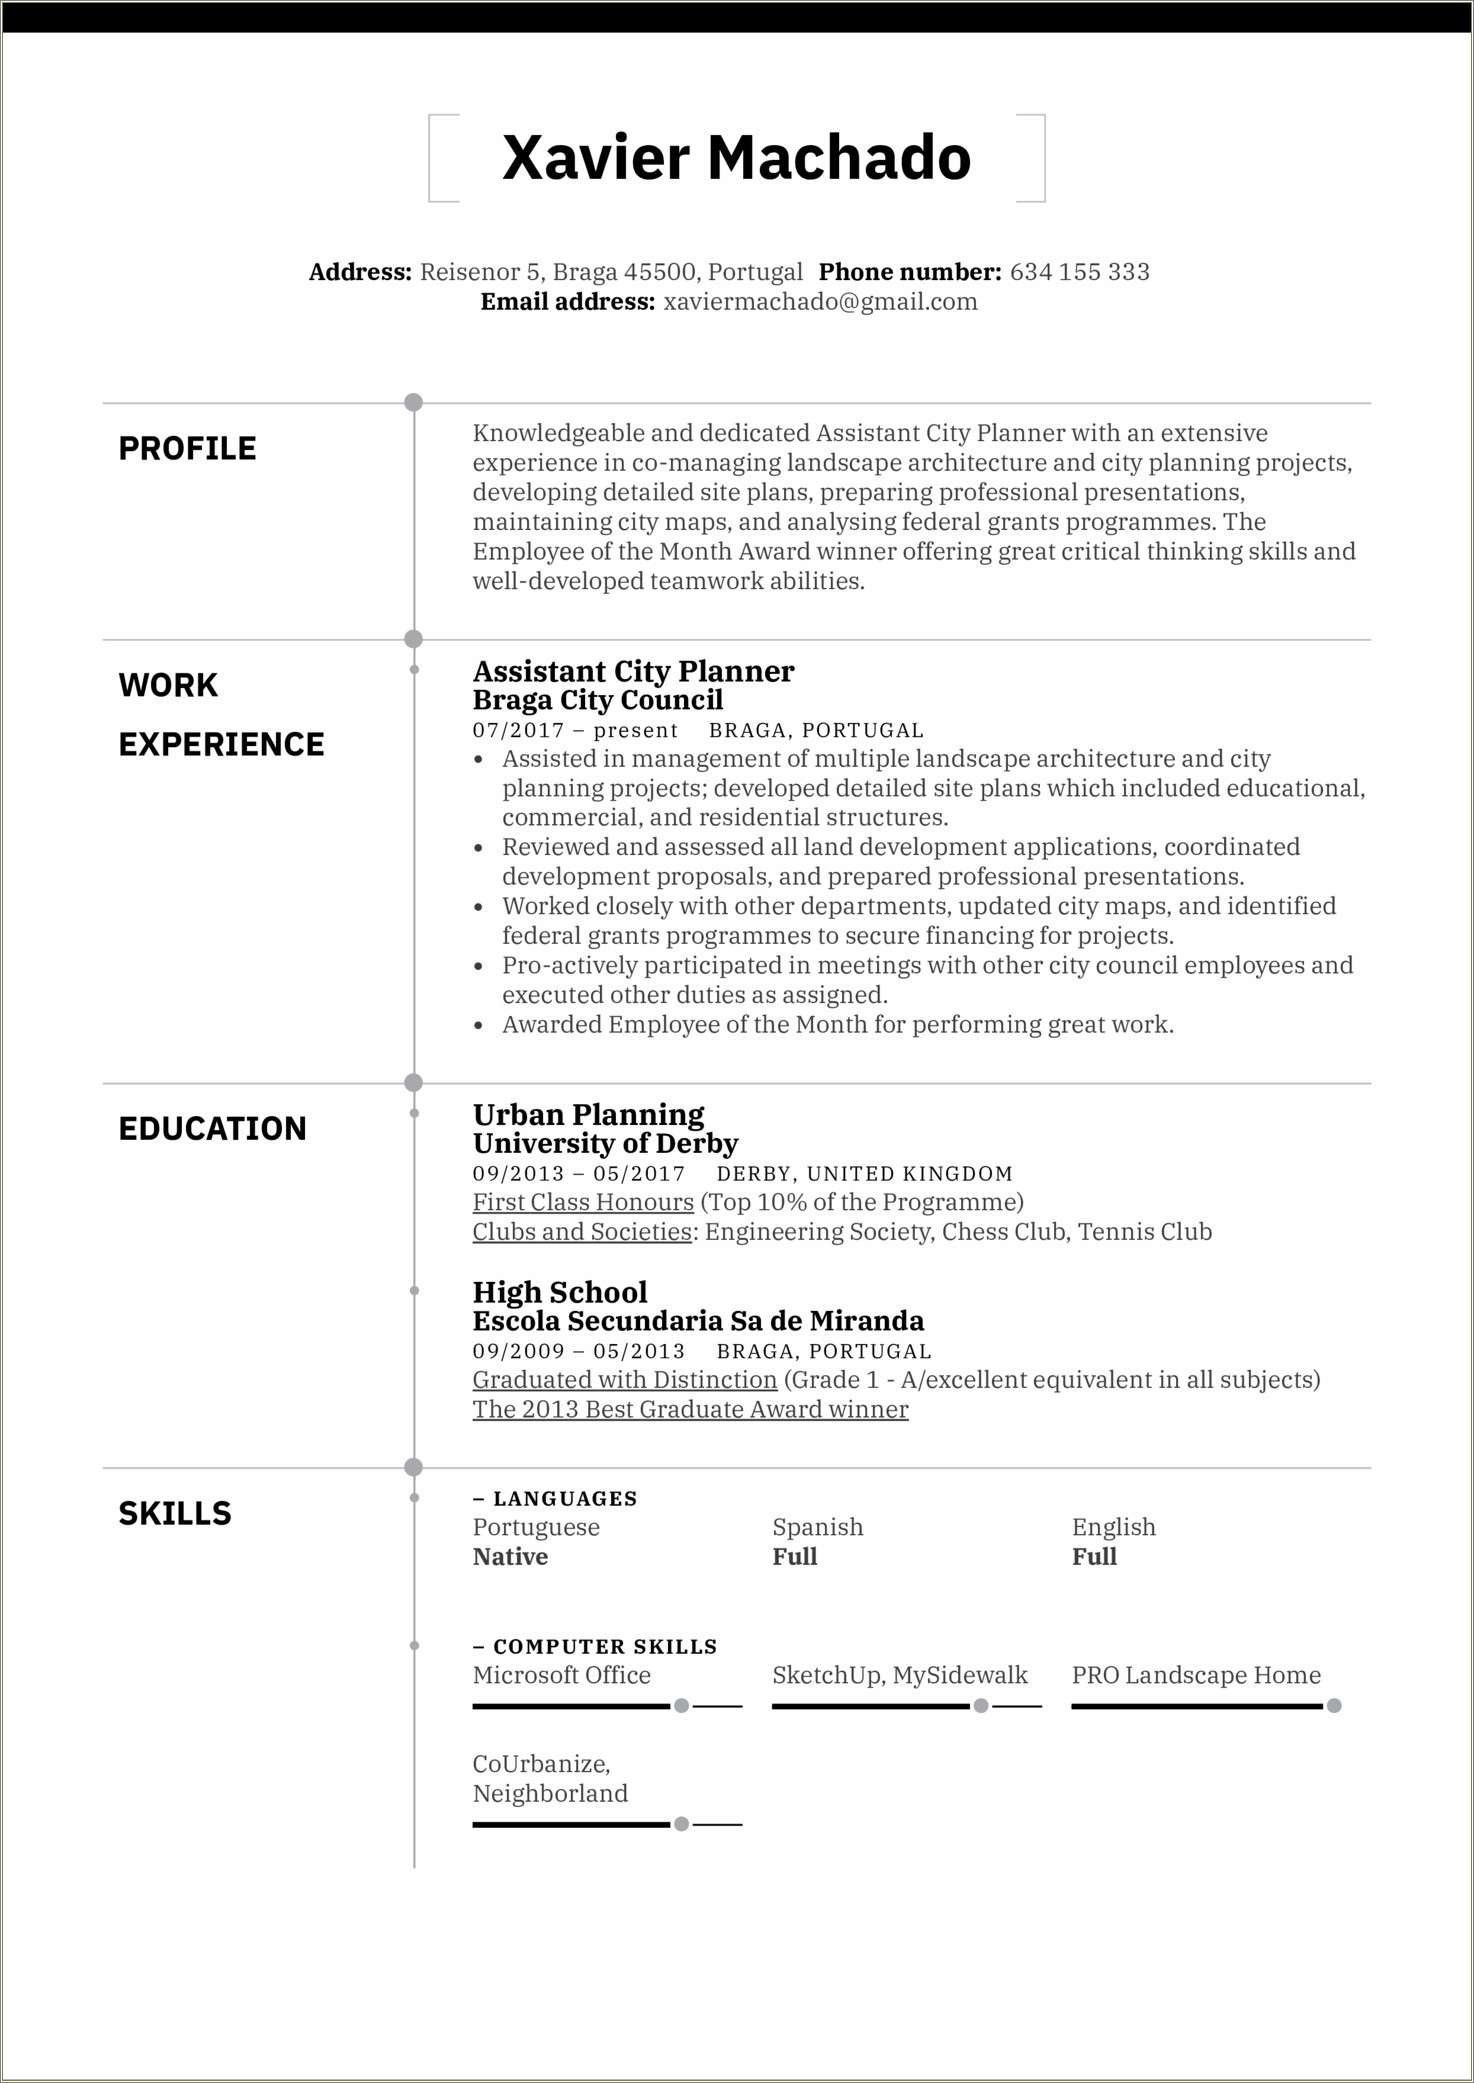 Is Planning A Skill To Put On Resume